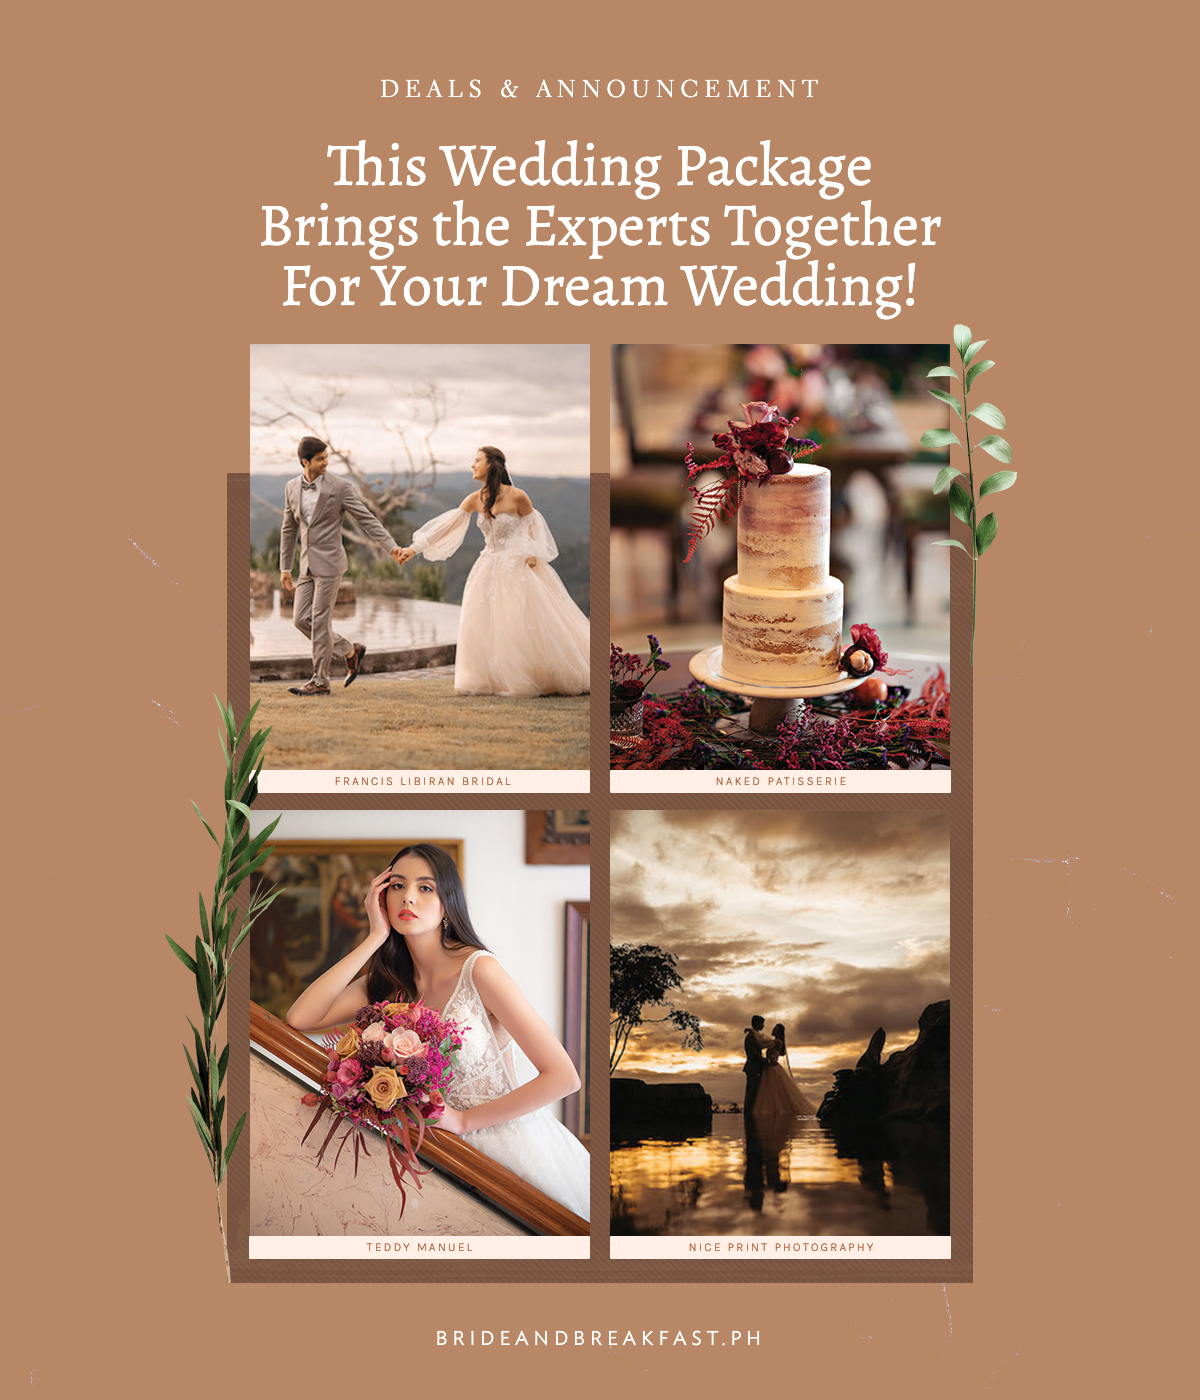 This Wedding Package Brings the Experts Together For Your Dream Wedding!